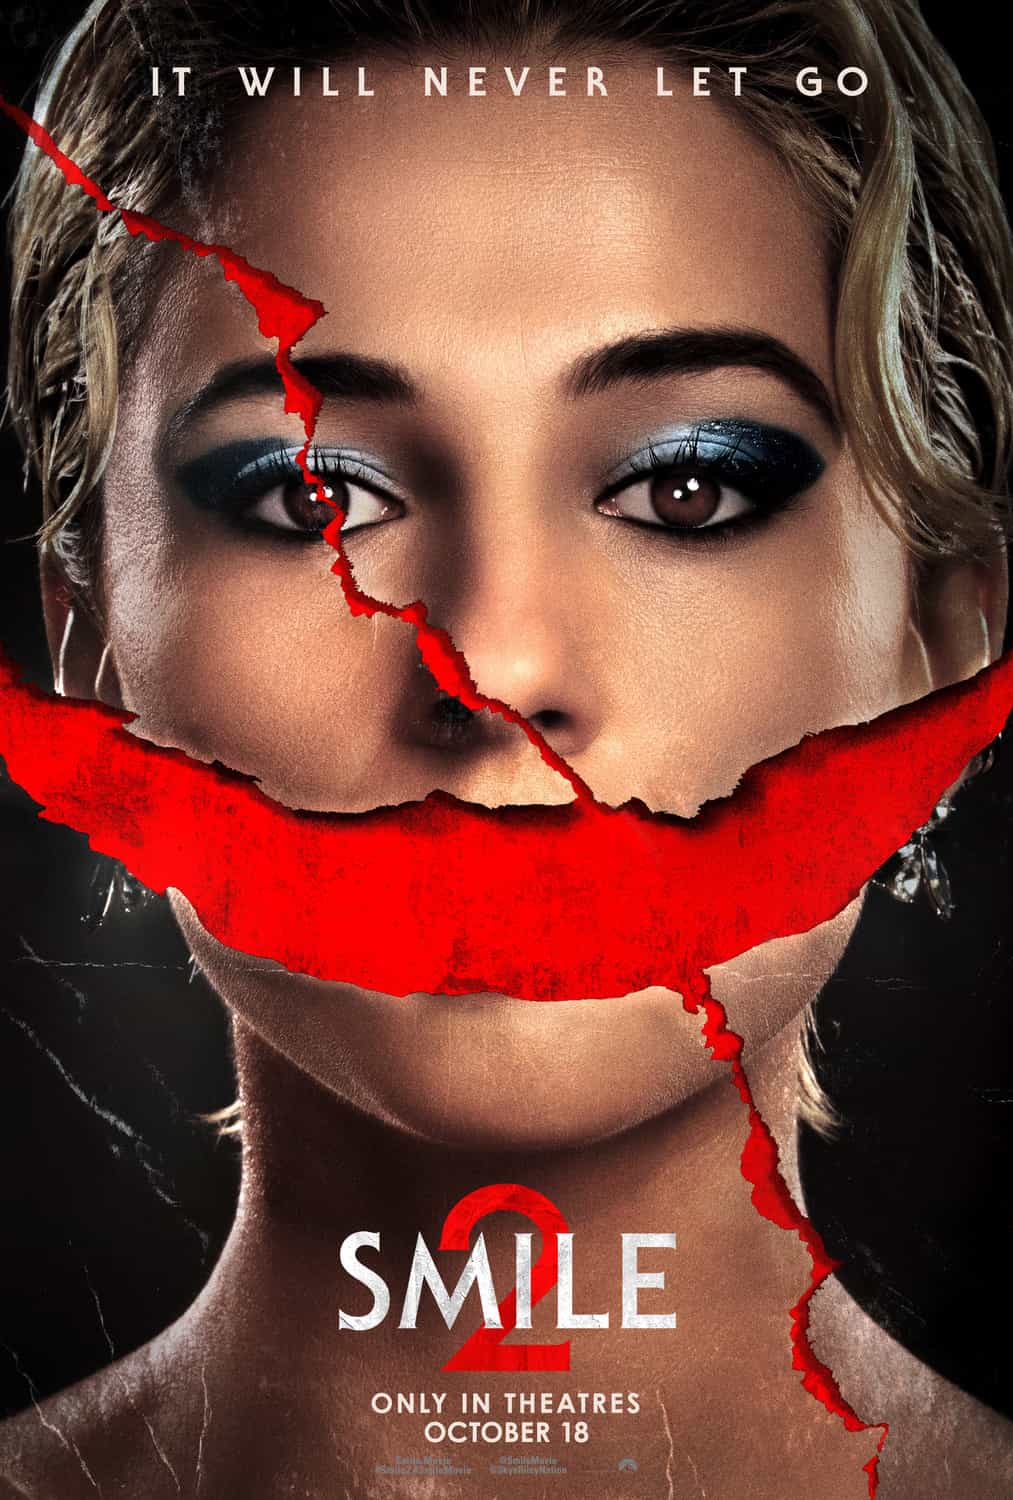 Check out the new trailer and poster for upcoming movie Smile 2 which stars Naomi Scott and Rosemarie DeWitt - movie UK release date 18th October 2024 #smile2